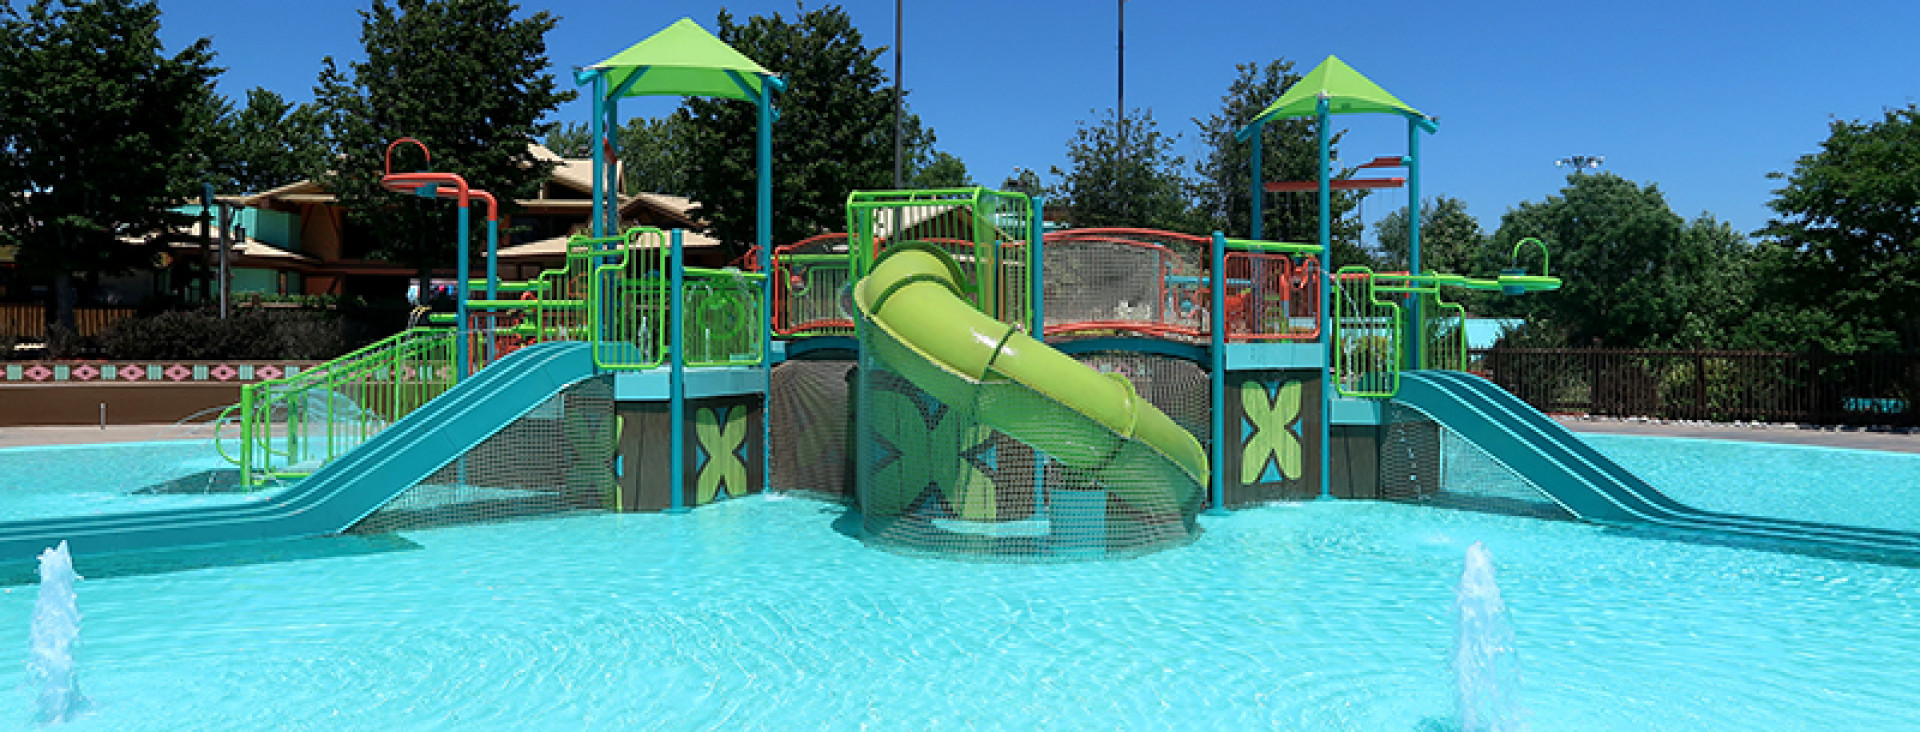 New Play Unit Helps Branson Waterpark Cater to Broader Audience